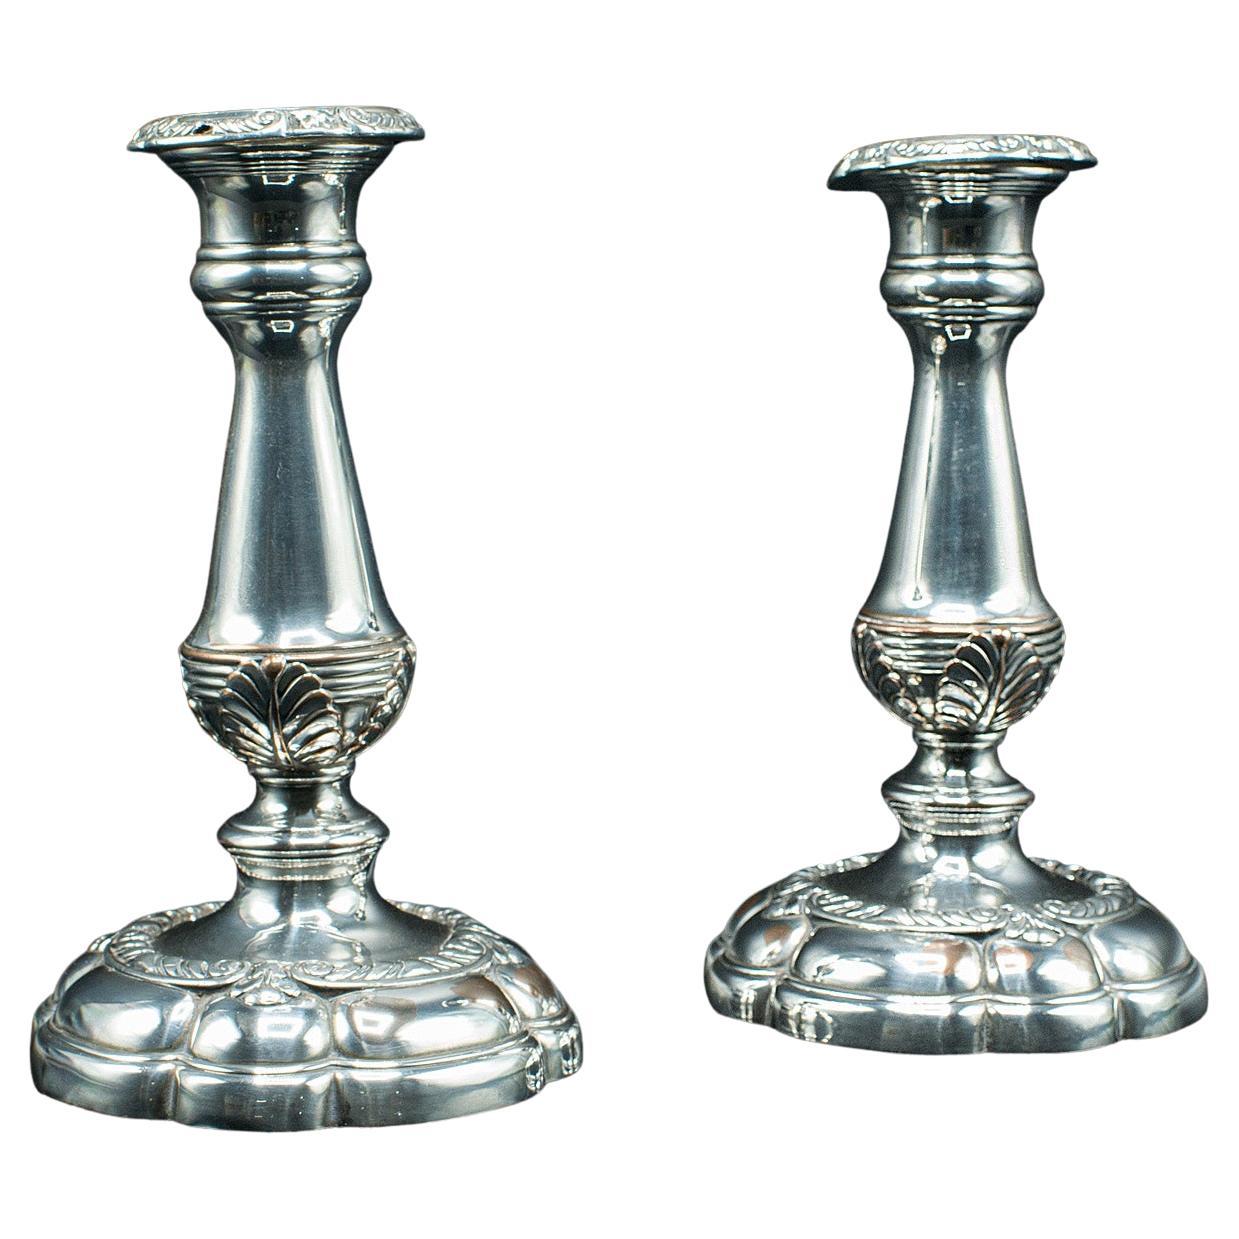 Pair Of Antique Decorative Candlesticks, English, Silver Plate, Stand, Edwardian For Sale